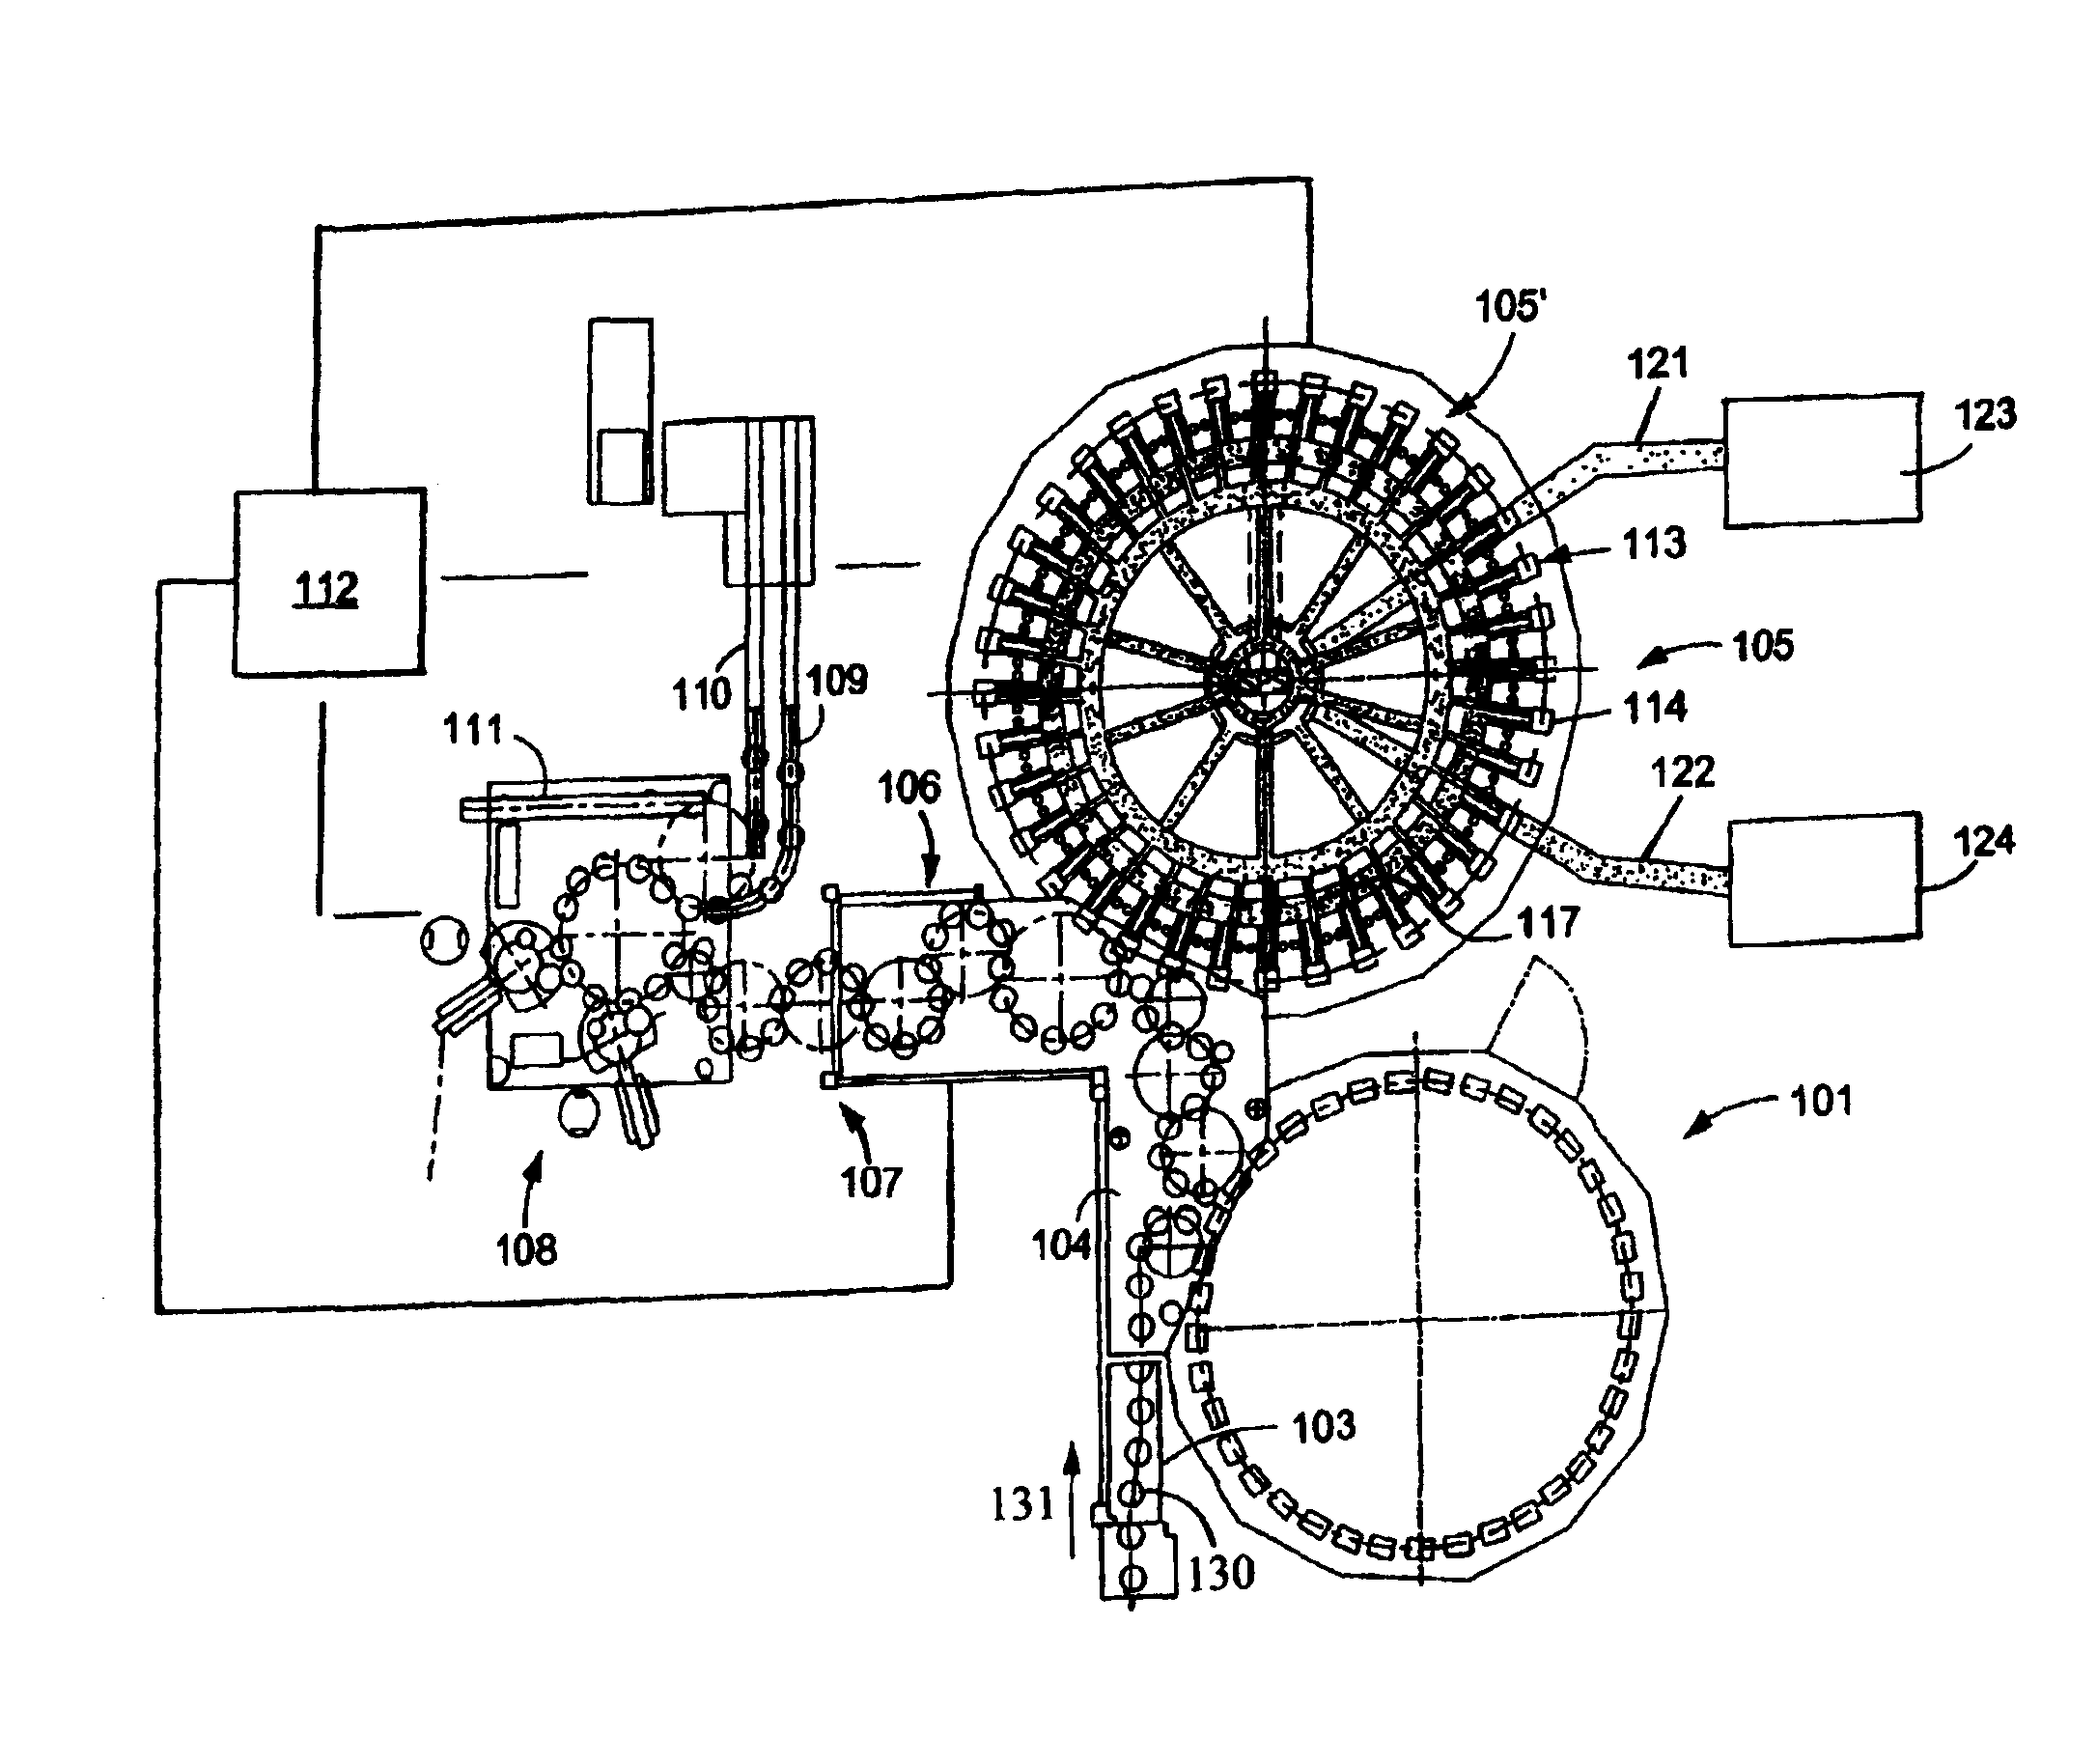 Beverage bottle or container filling plant having a beverage bottle or container treatment arrangement and a method of operating a beverage bottle or container filling plant